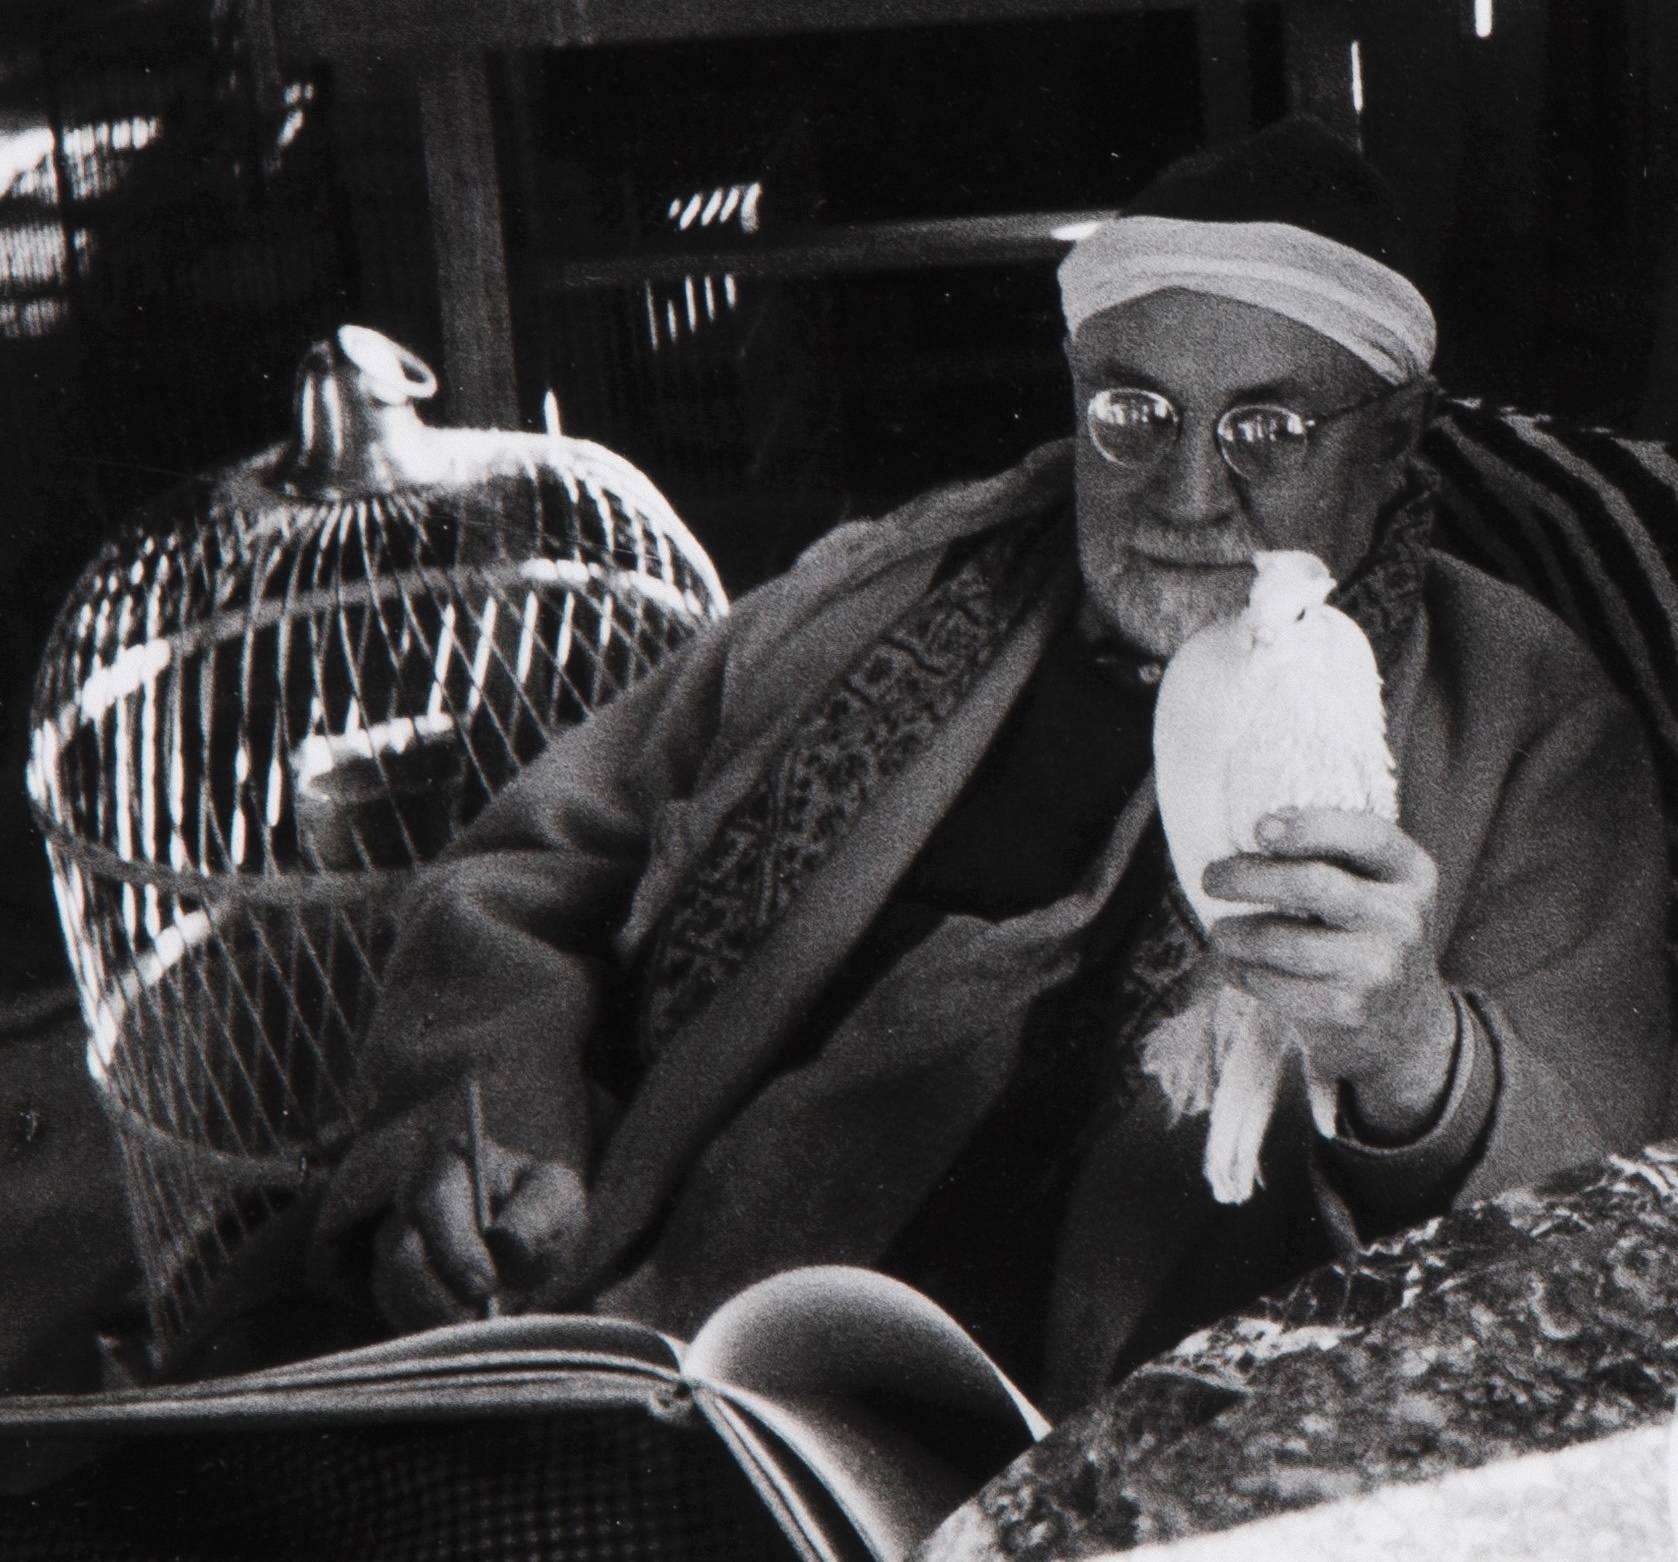 Henri Matisse sketching doves. Later gelatin silver print photograph by Henri Cartier-Bresson 1944, with copyright stamp.

This work of art is part of the KLM Royal Dutch Airlines Art Collection. This photo is acquired in 1999. A selection of